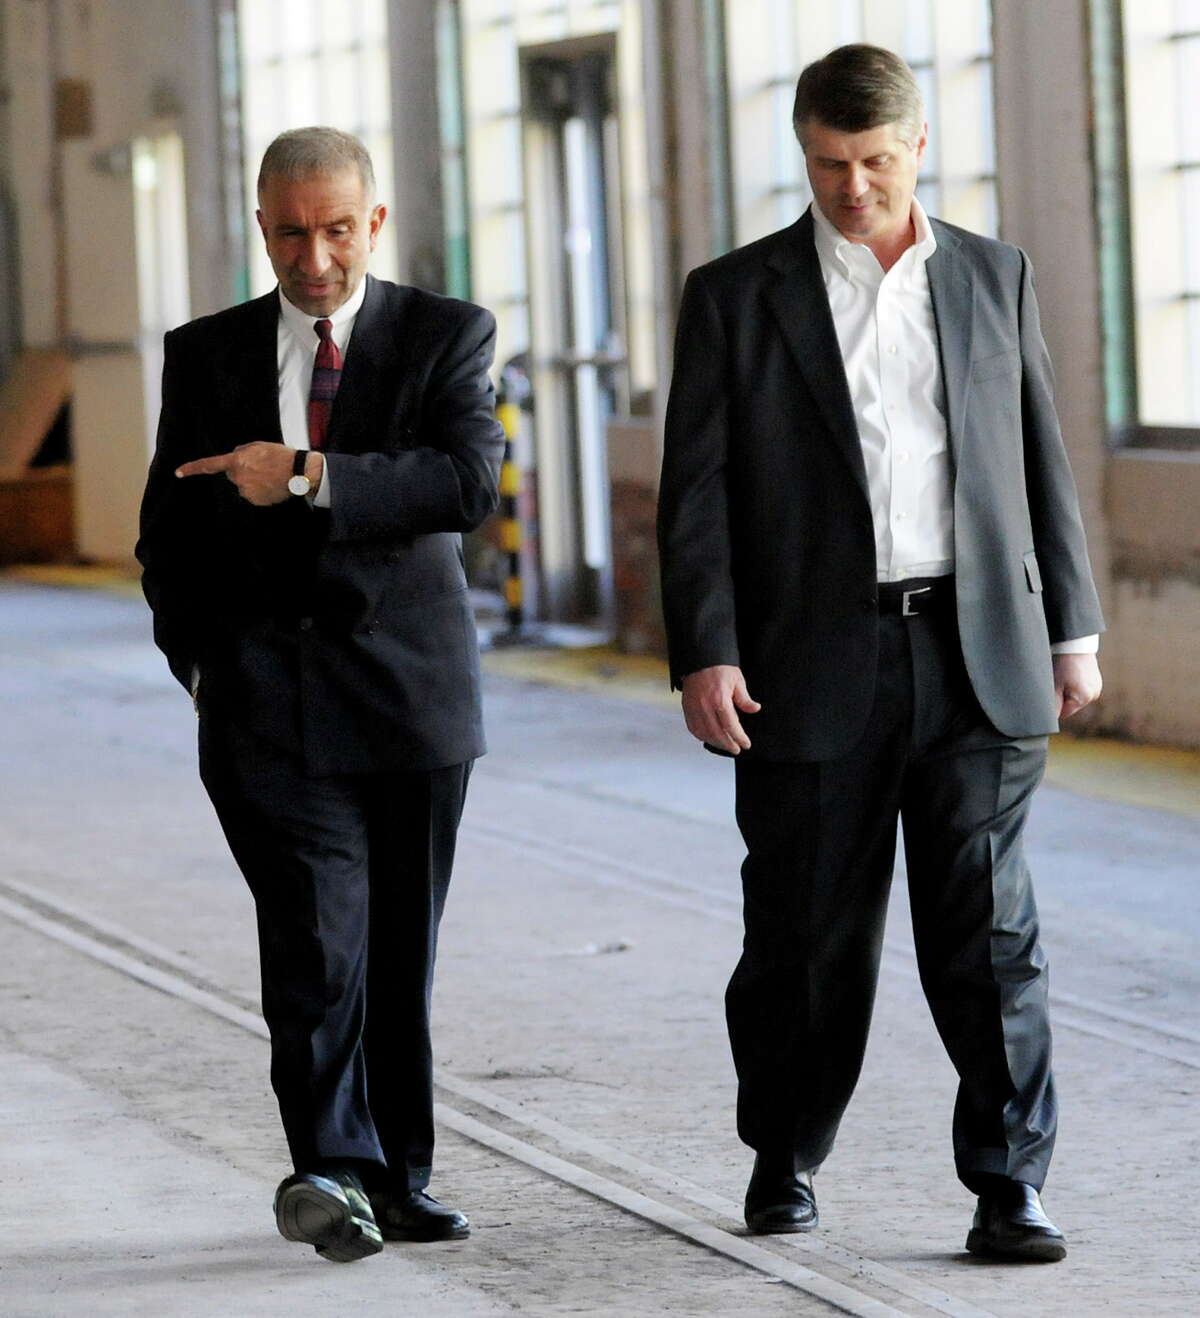 Alain E. Kaloyeros, senior vice president and CEO of the College of Nanoscale Science and Engineering, left, and Rick Whitney, CEO of M + W Group, walk through an yet to be developed area in the Watervliet Arsenal on the way to the new headquarters of M + W on Thursday, Aug. 4, 2011, in Watervliet, N.Y. (Cindy Schultz/Times Union archive)